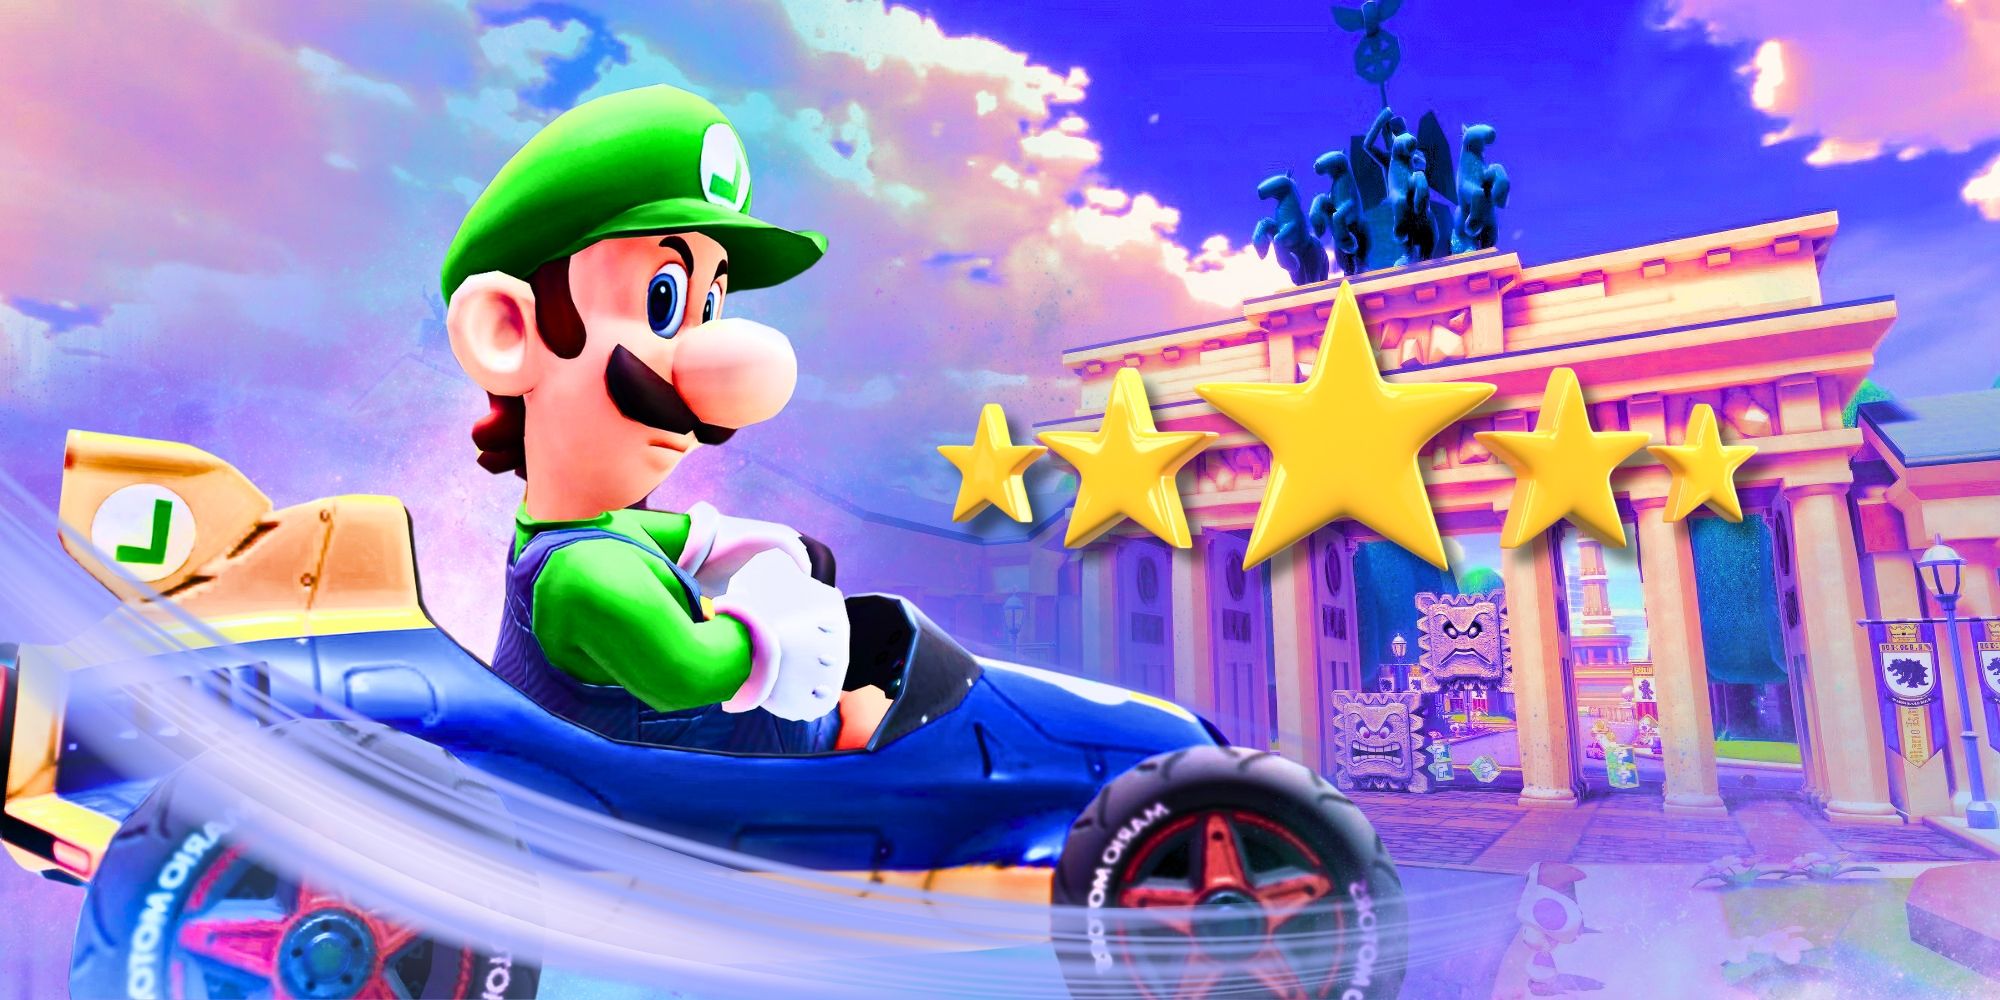 Luigi from Mario Kart with the Berlin Byways track as a background and 5 gold stars.